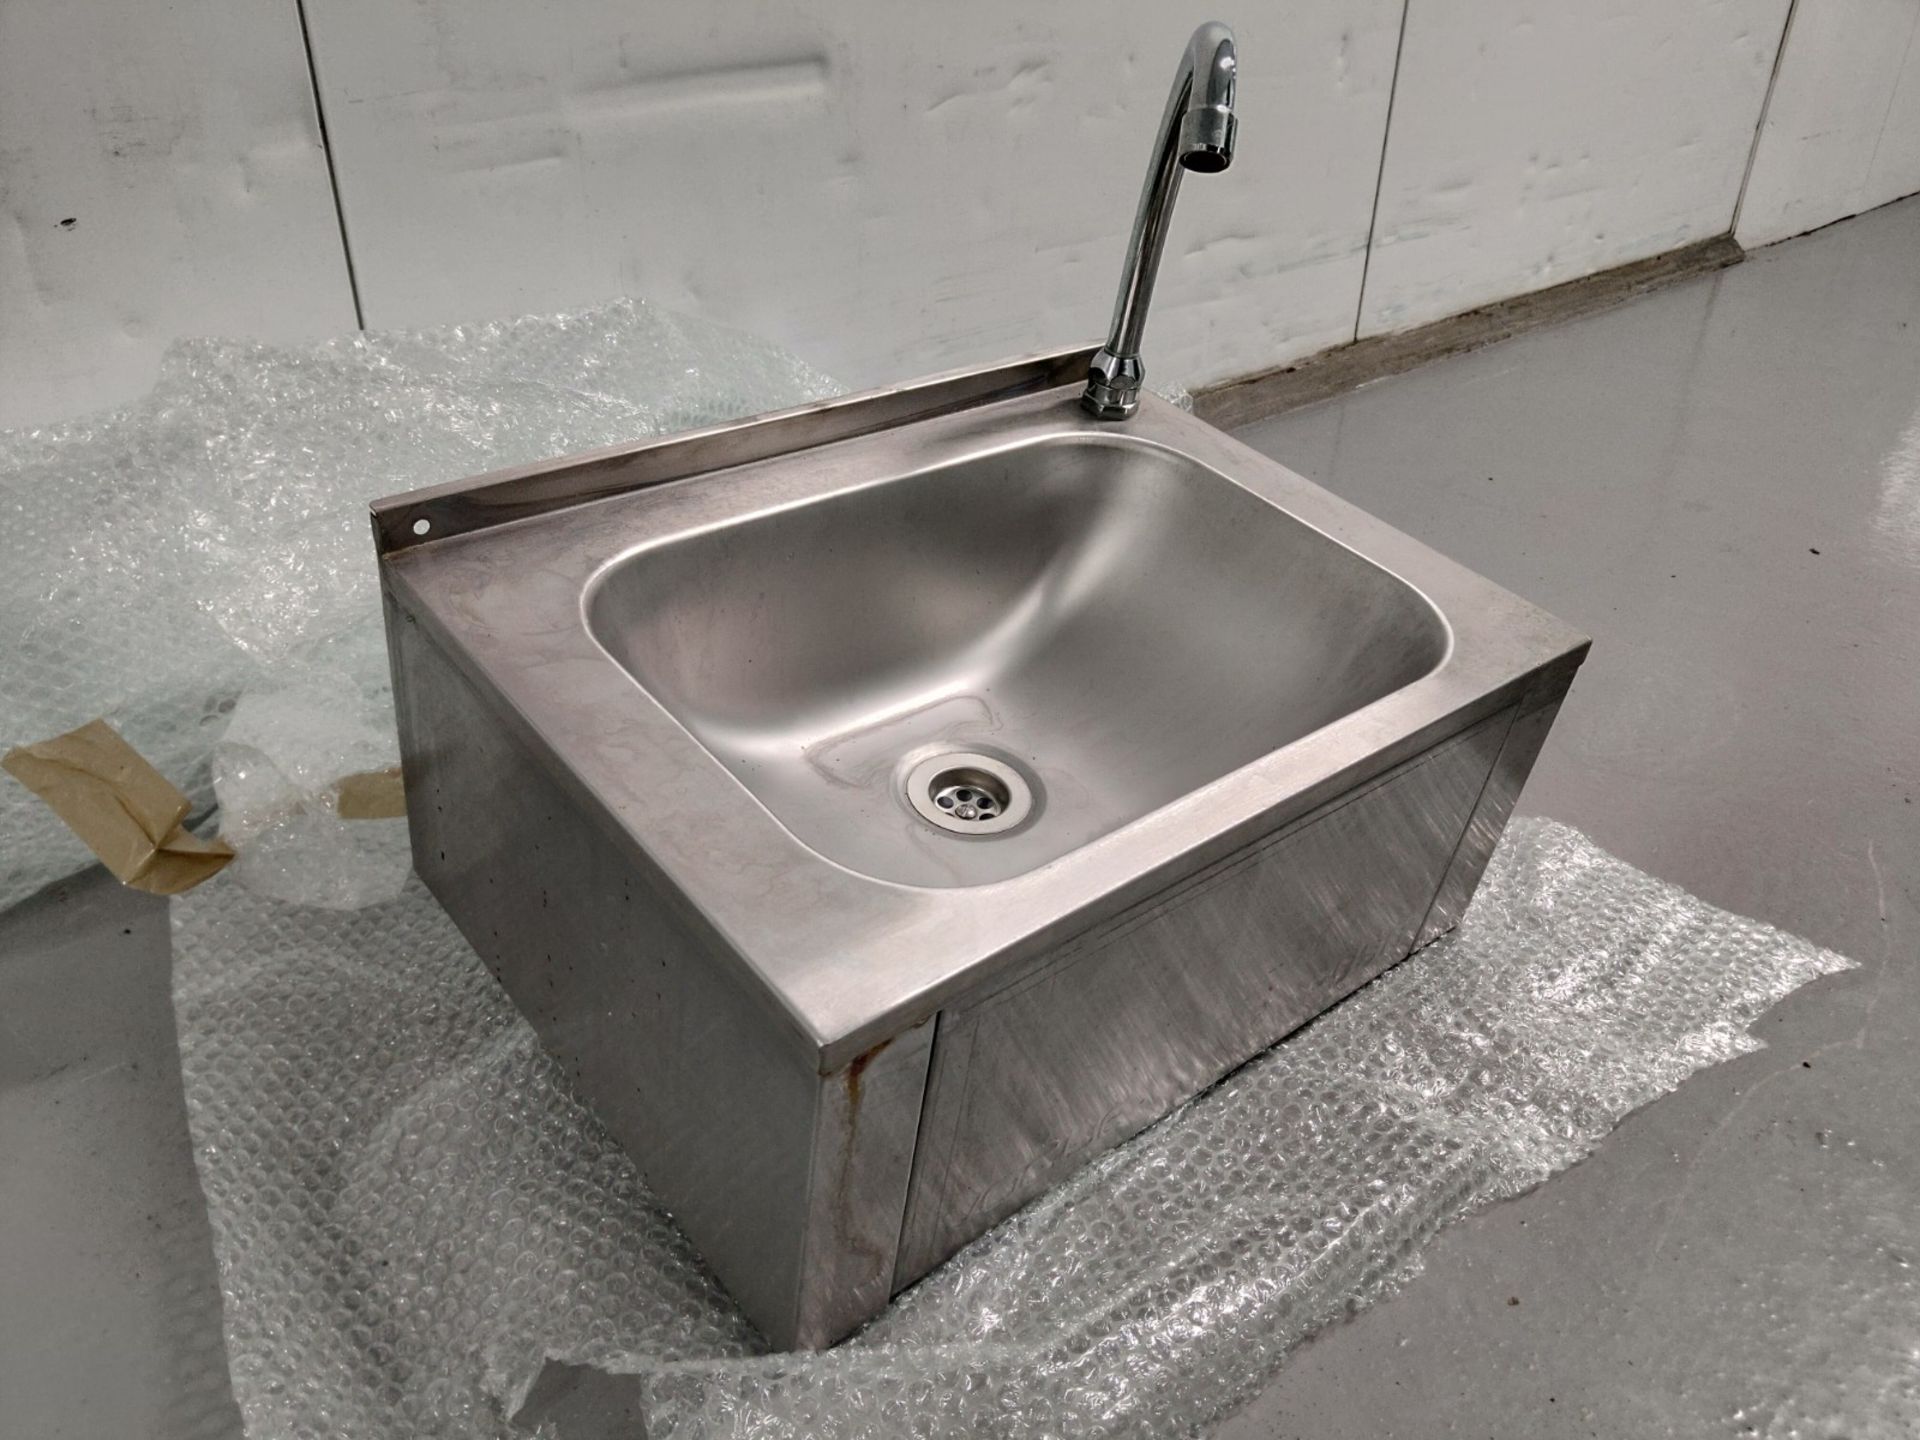 Vogue Stainless Steel Knee Operated Sink - Image 4 of 4